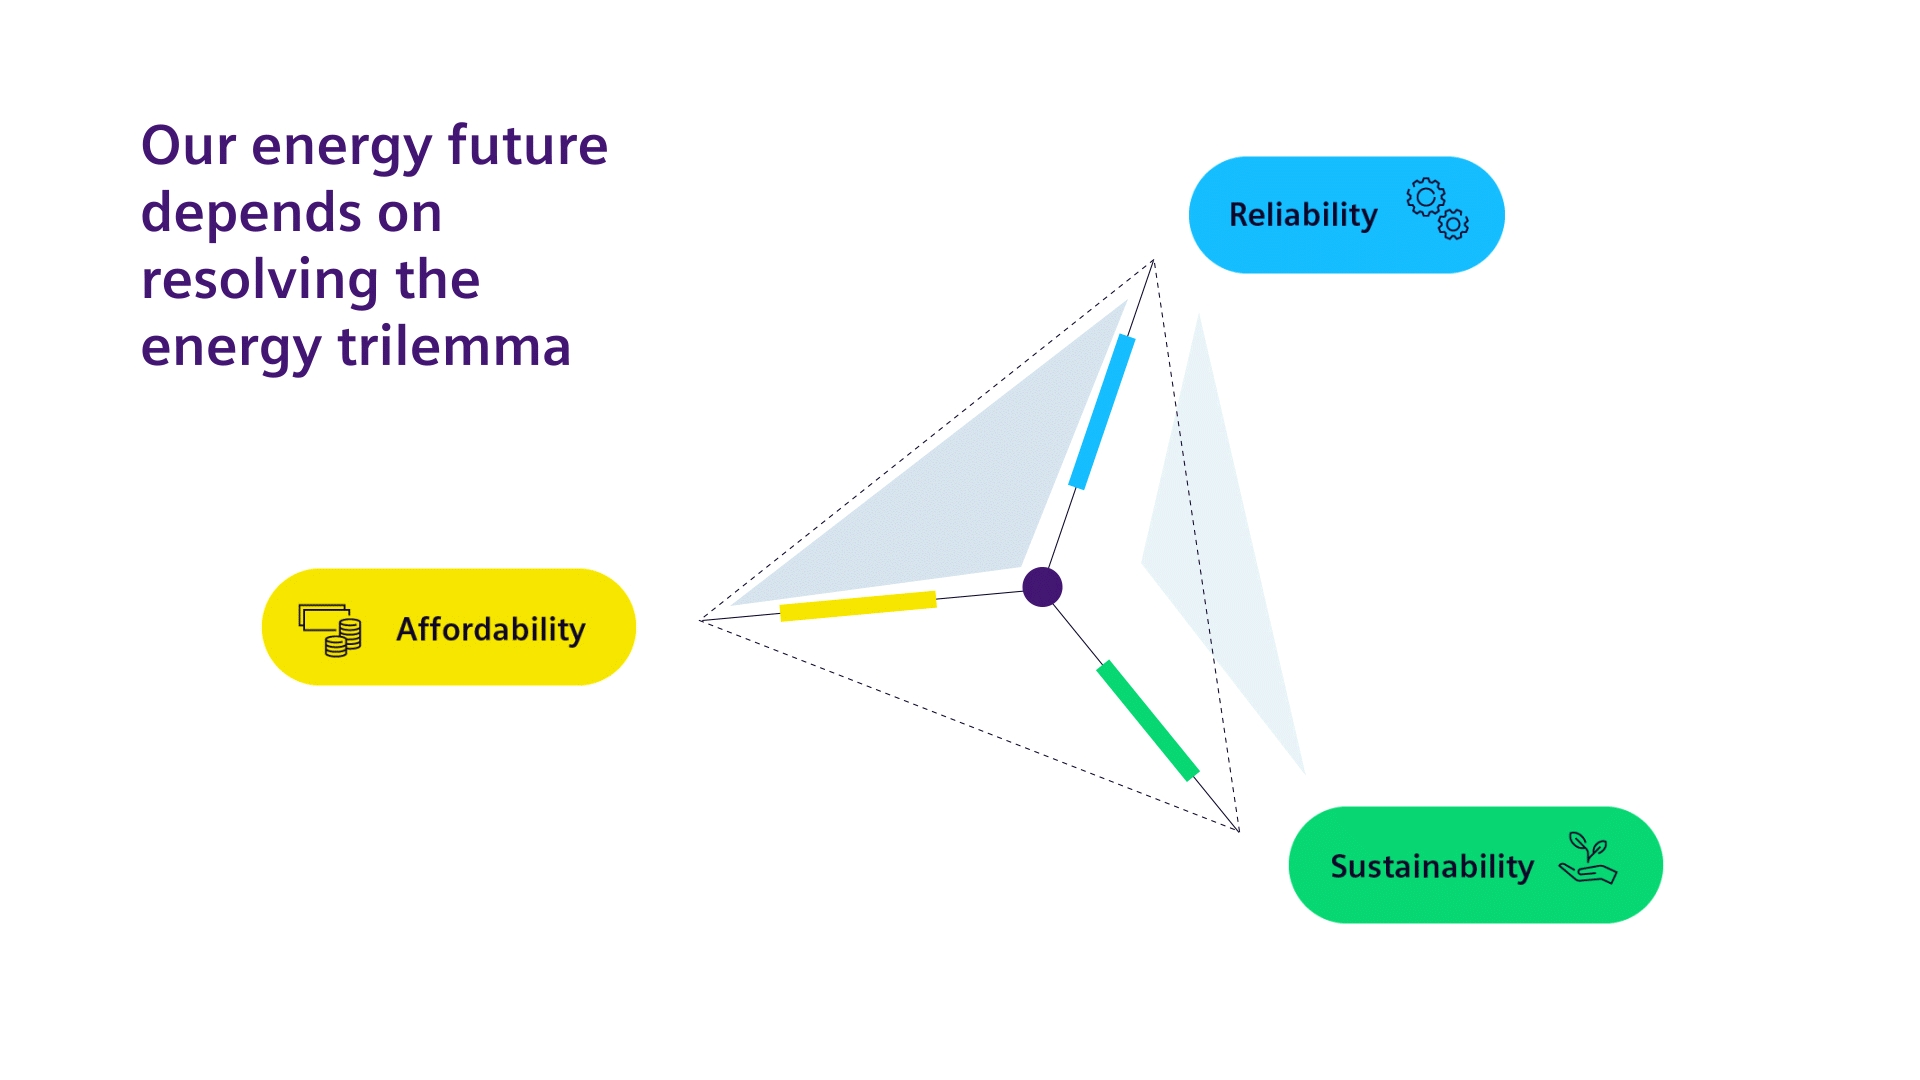 Diagram showing the energy trilemma: security, affordability and sustainability